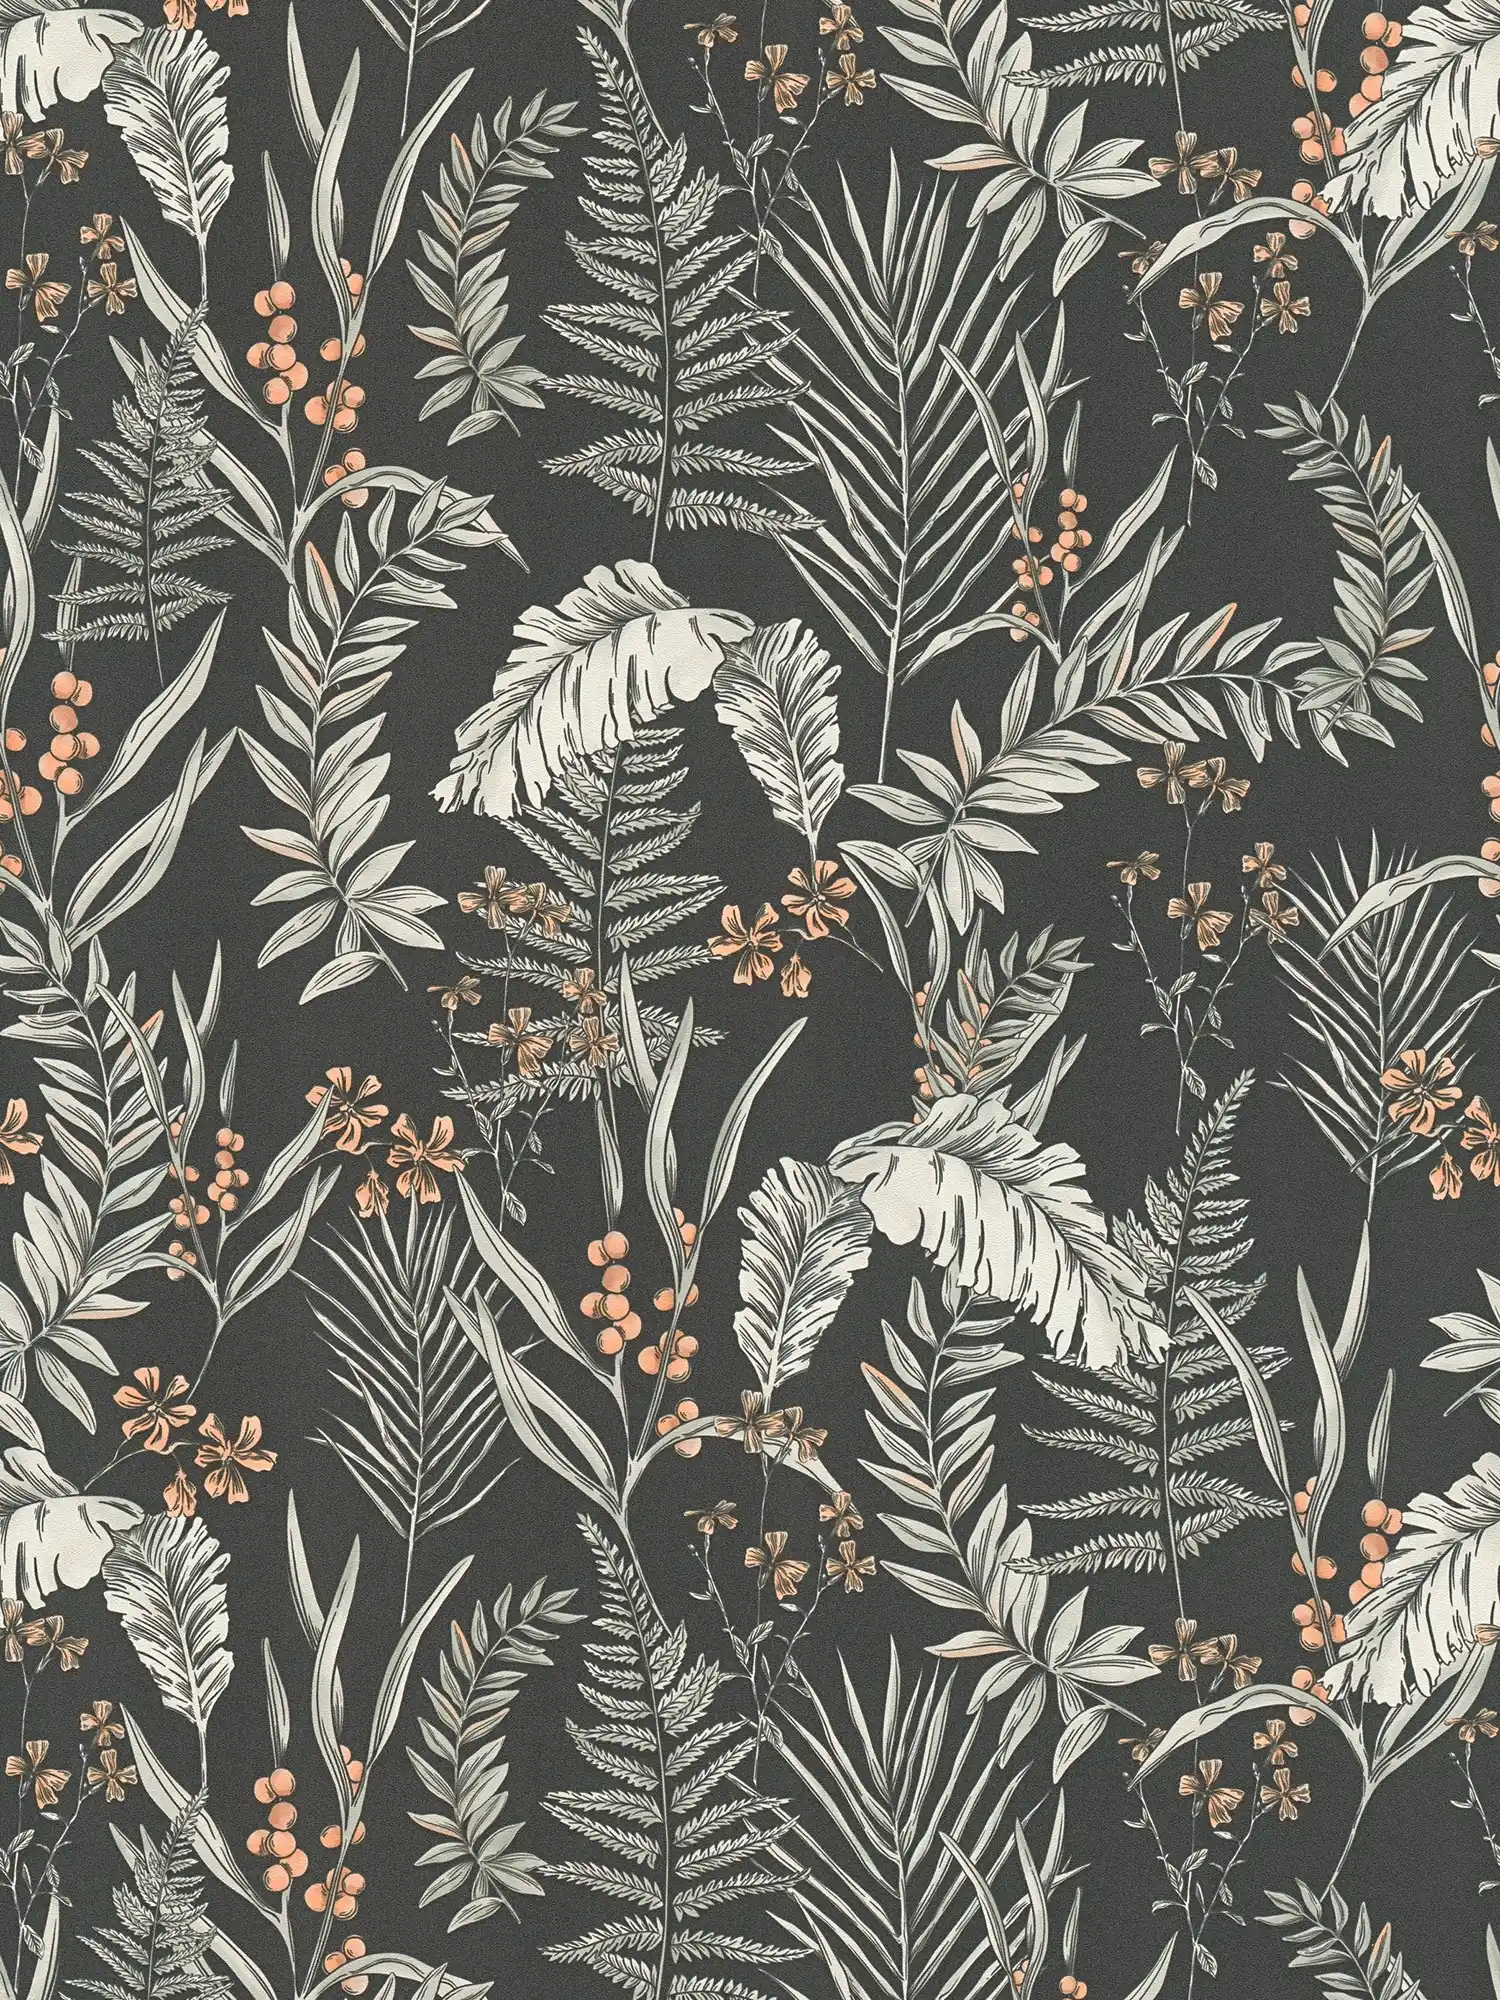 Floral wallpaper in modern style with flowers & leaves textured - Black, White, Orange
